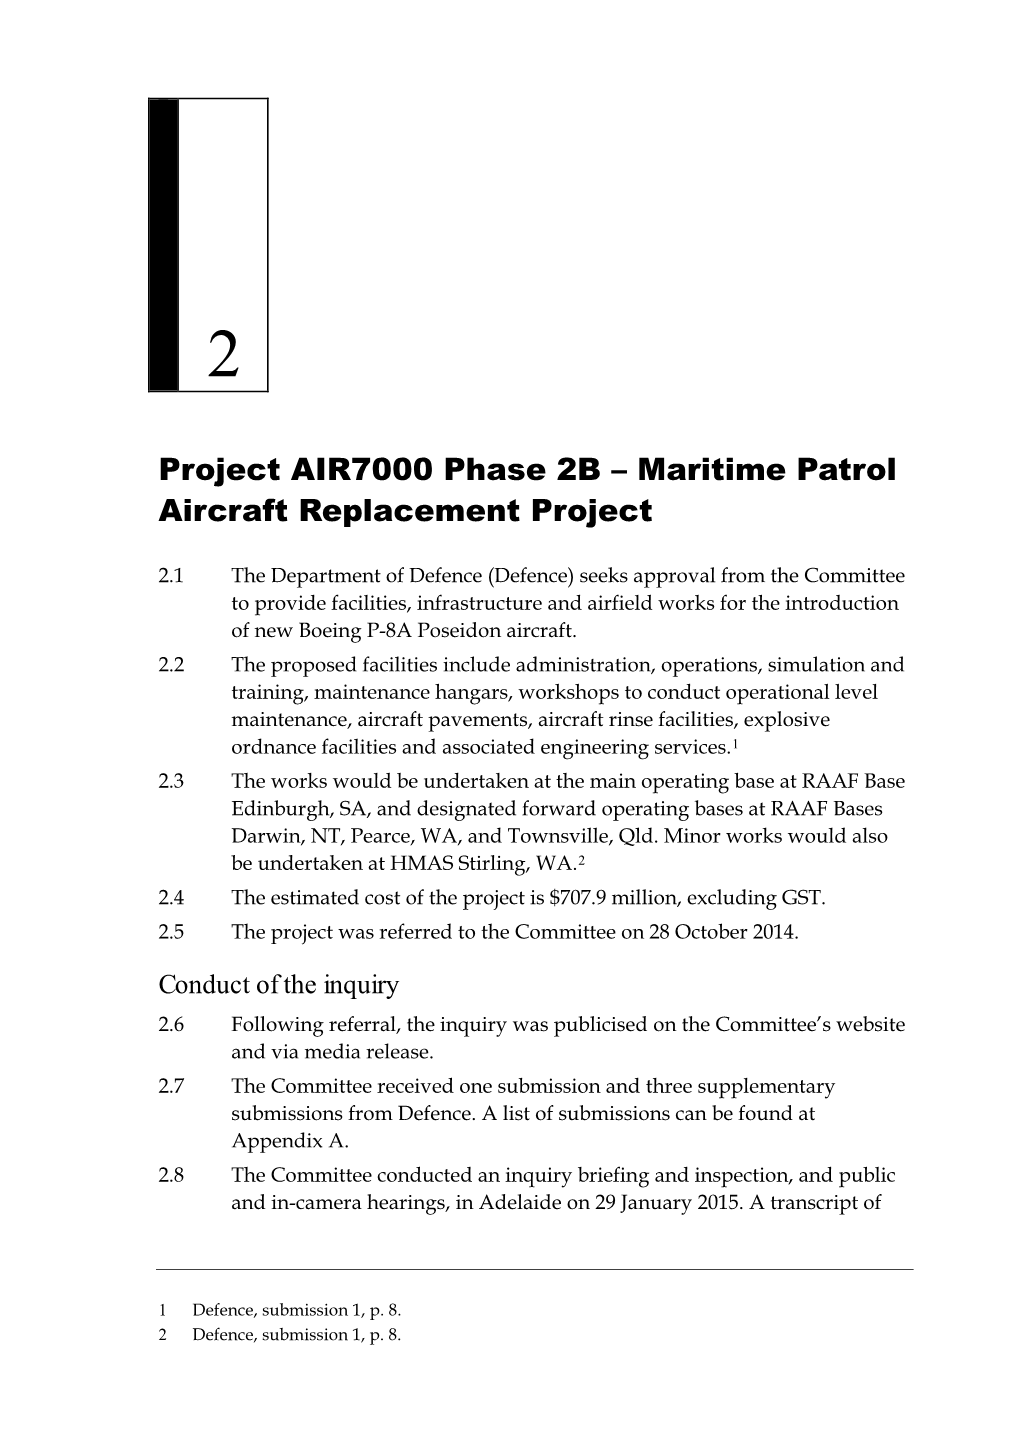 Chapter 2: Project AIR7000 Phase 2B